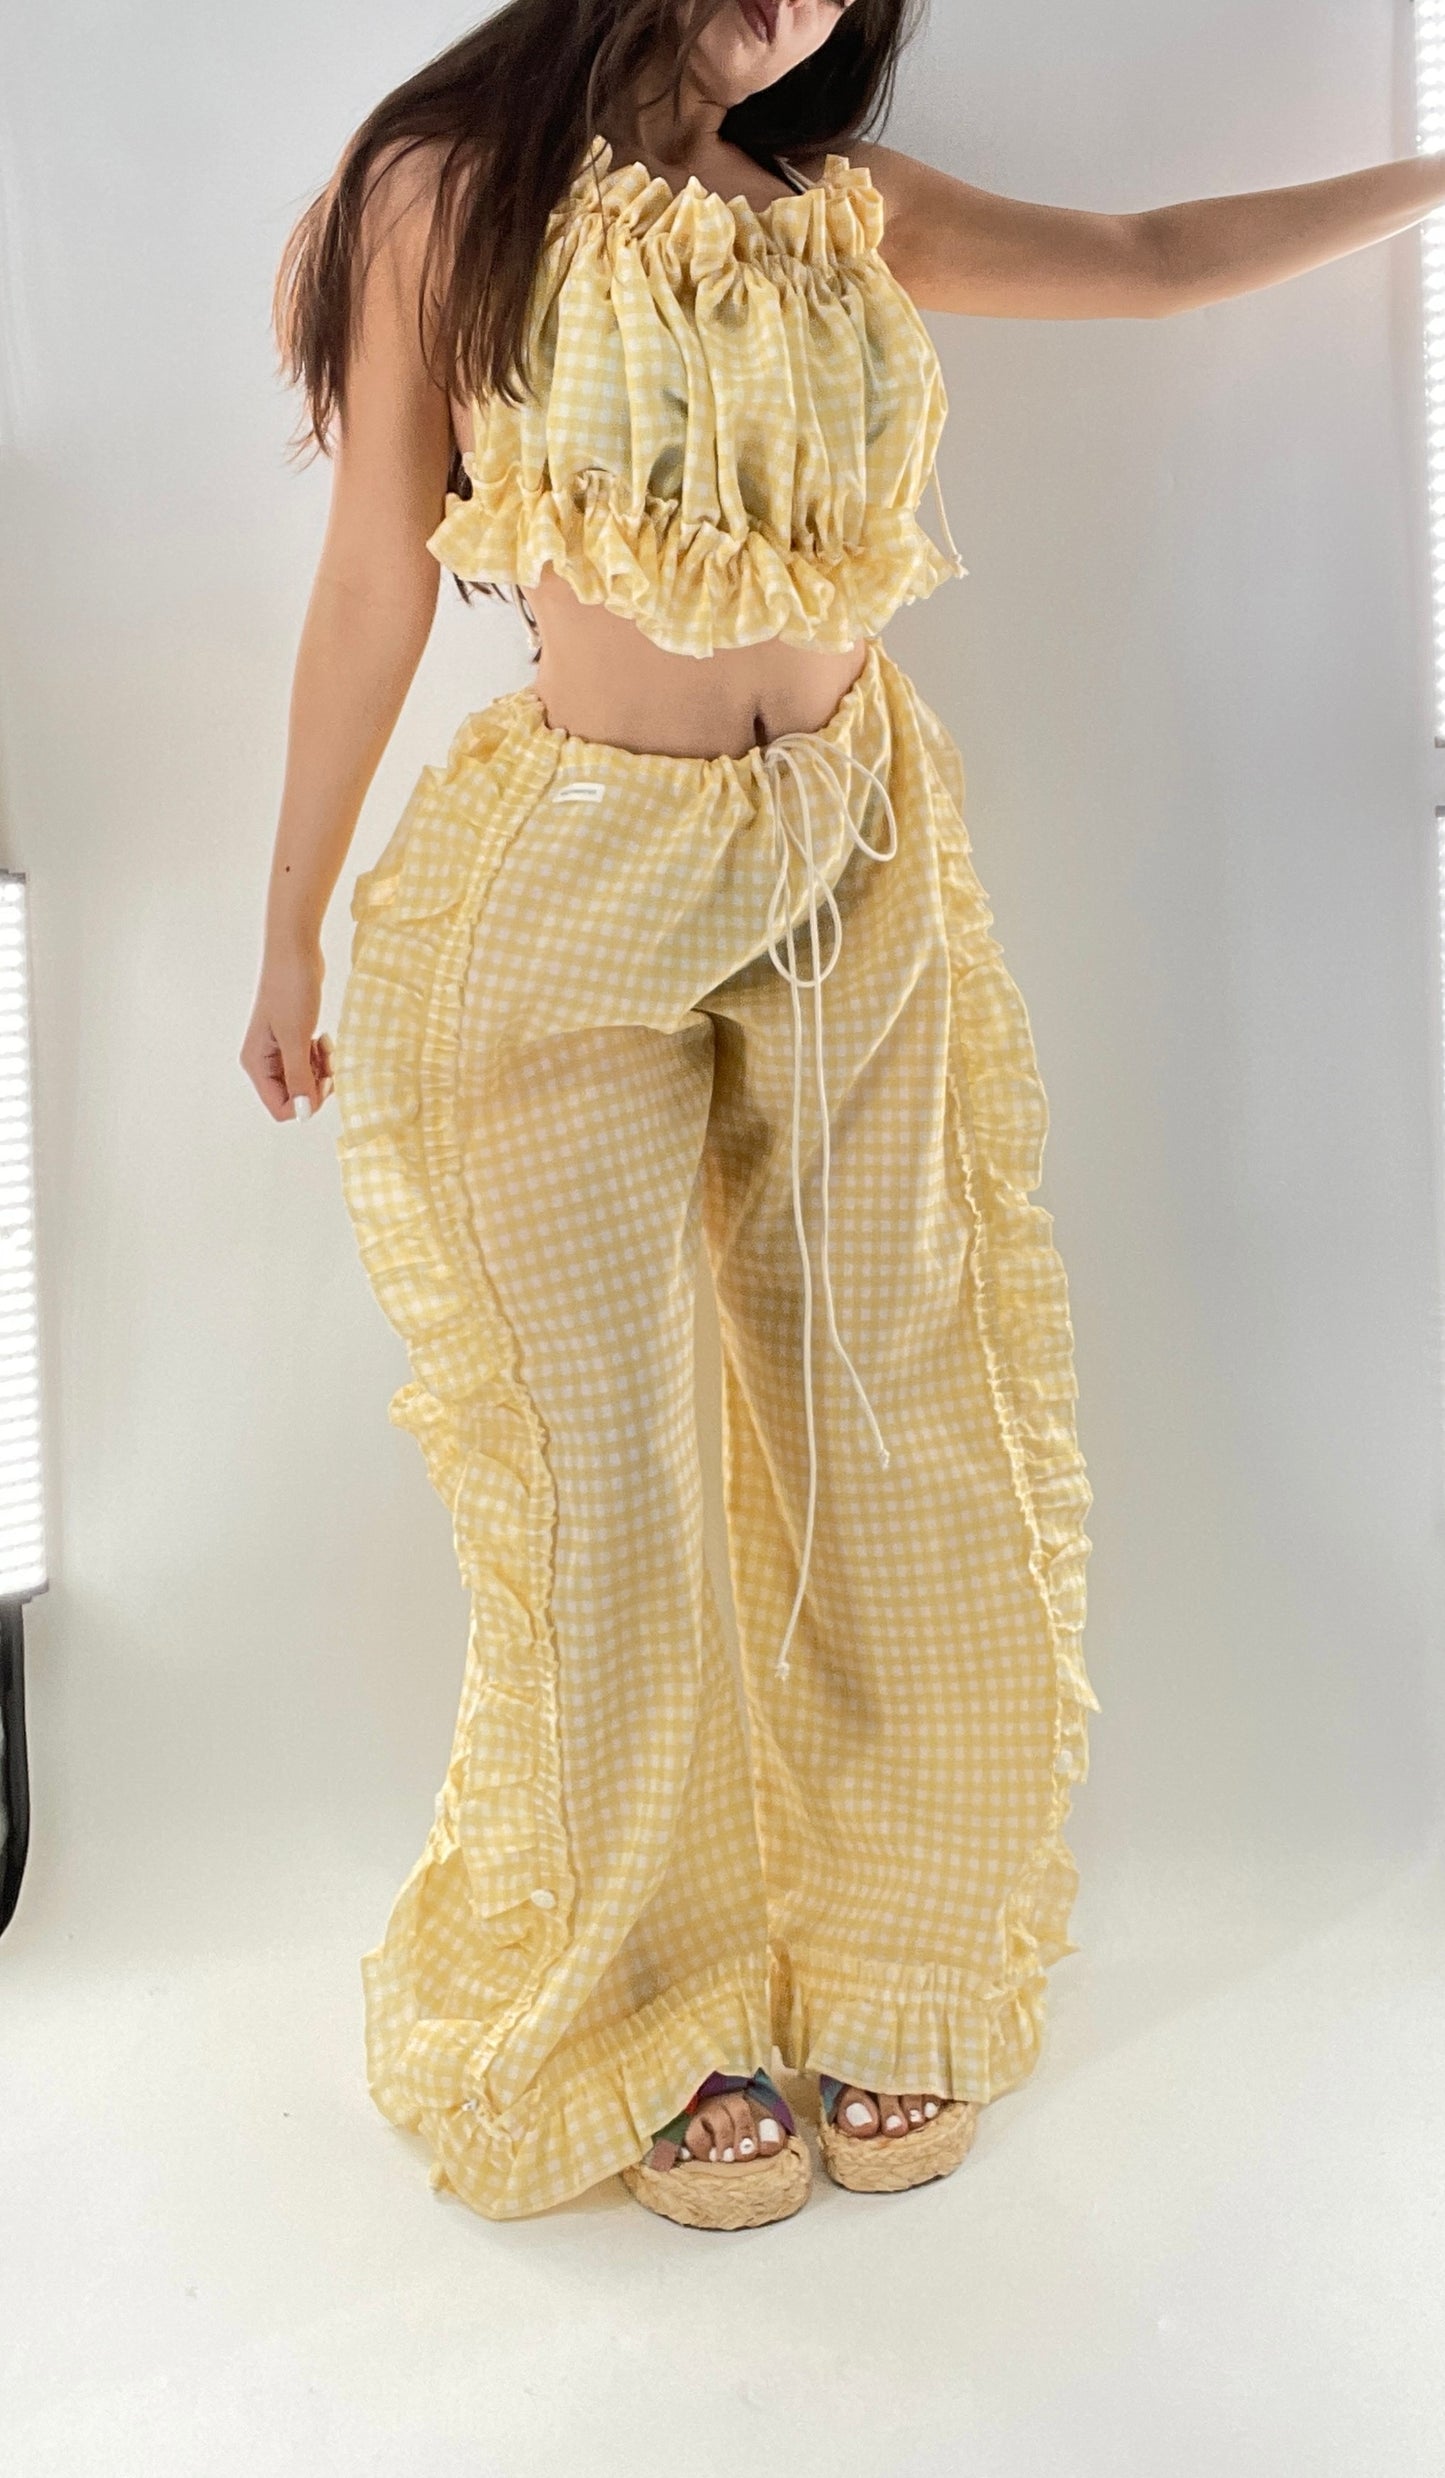 Vintage 2 Piece Yellow Checkered/Gingham Patterned Picnic Set with Ruched Bust Top and Ruffle Side Wide Legs with Adjustable Length, Strap Up Buttons on Hem (One Size)